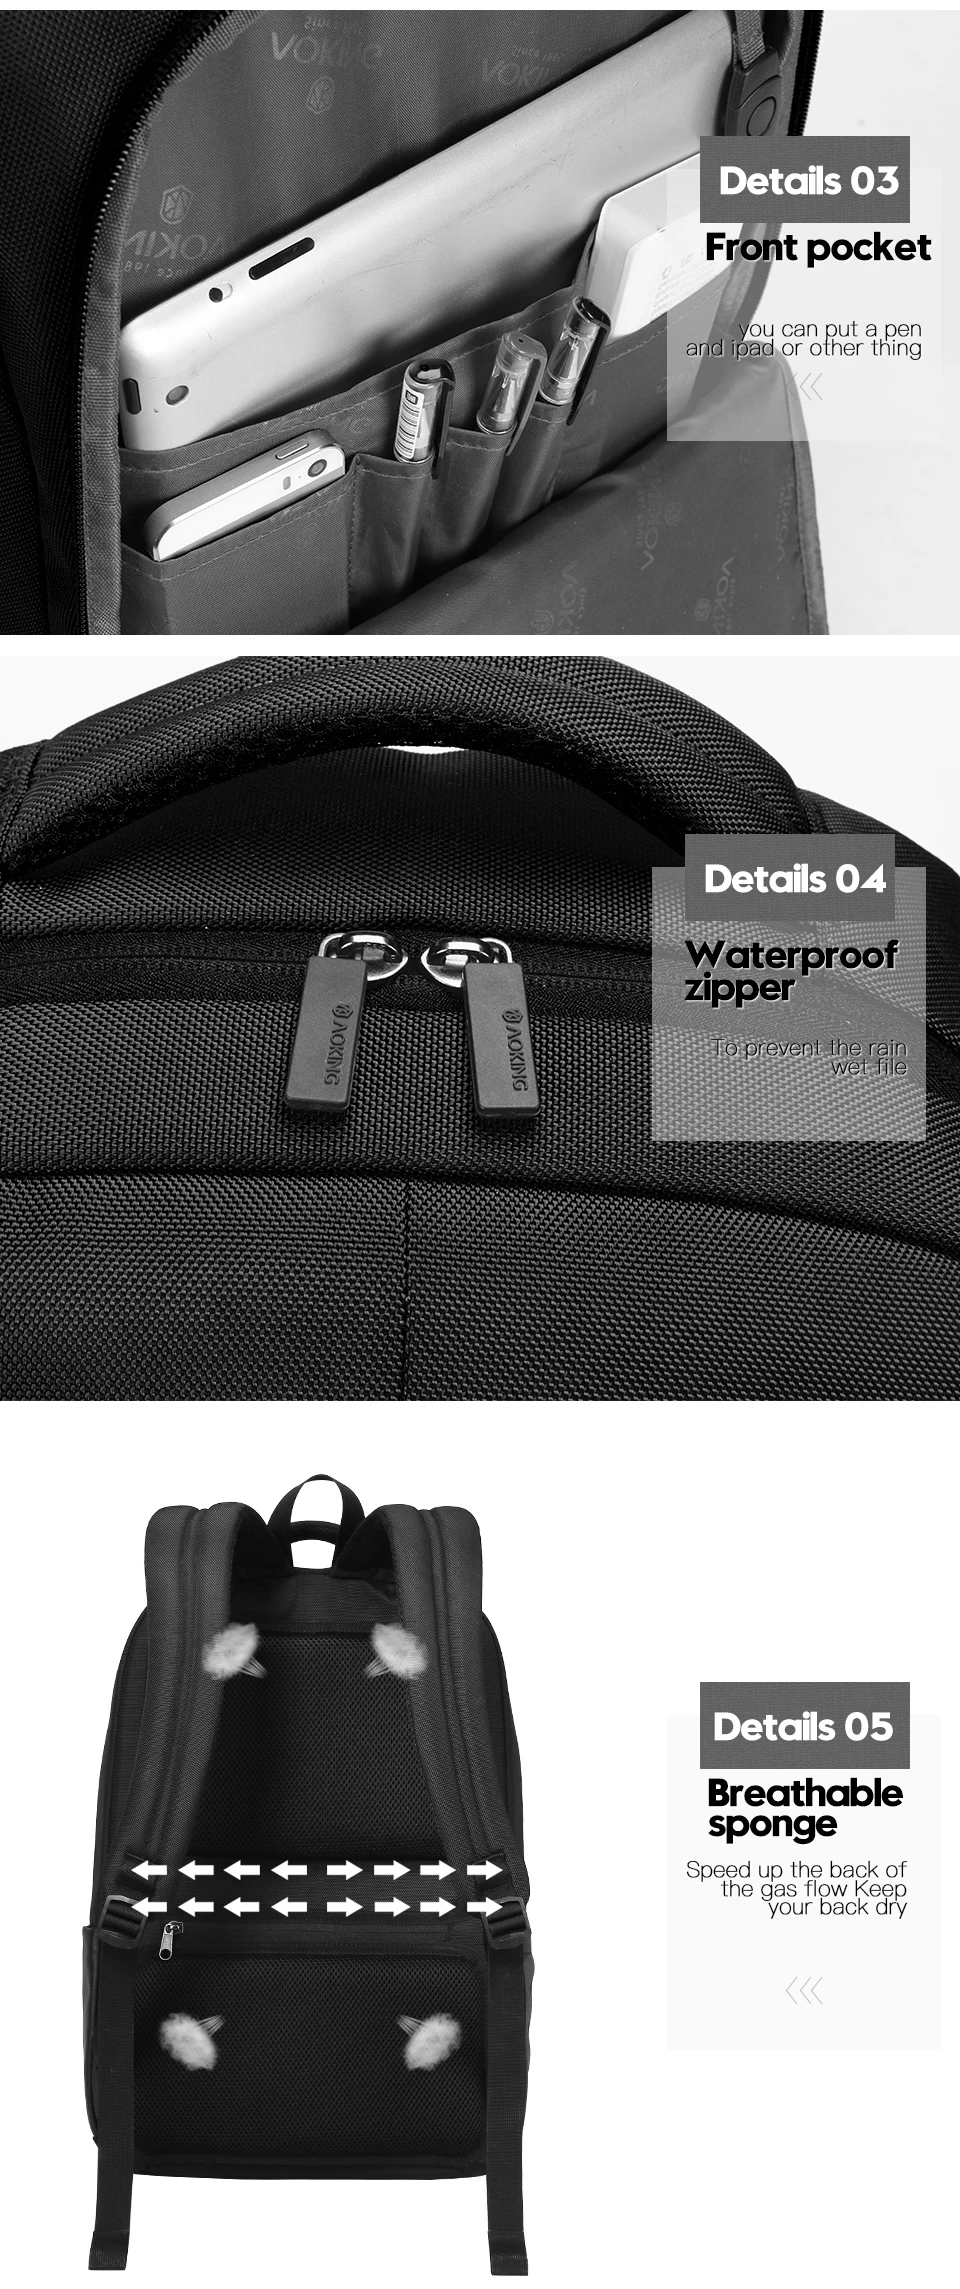 backpacks with secret compartments